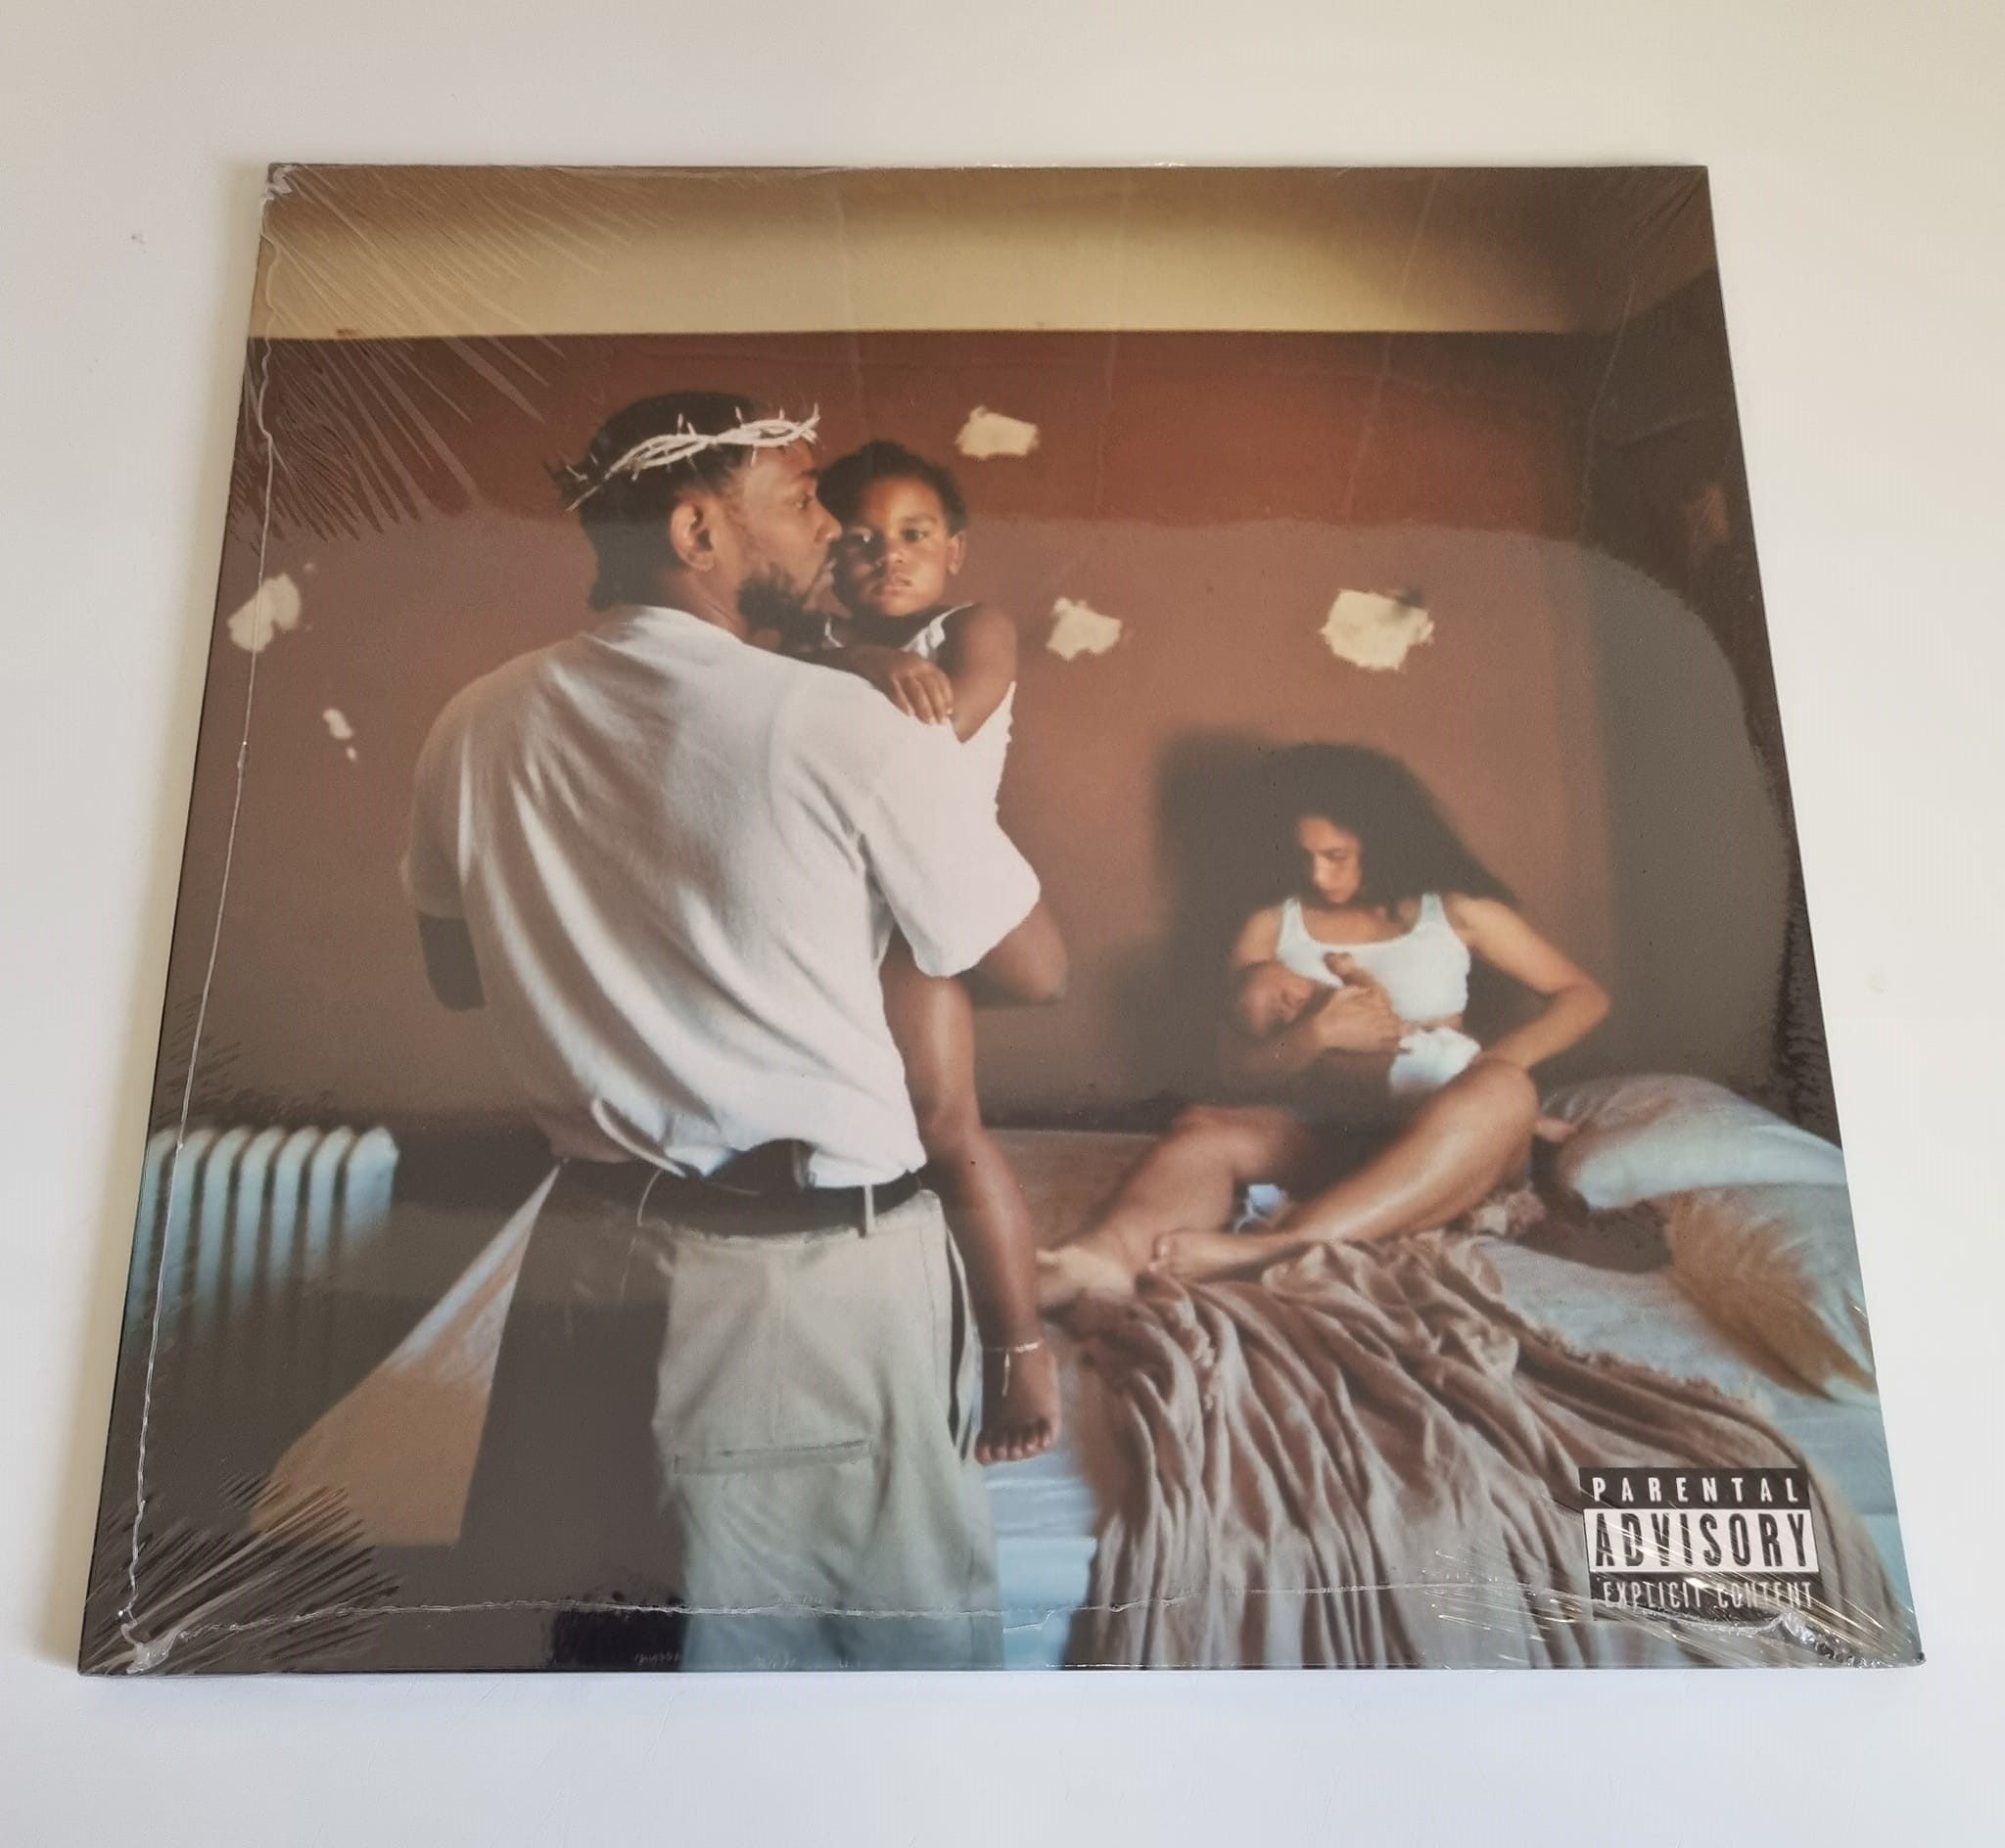 Buy this rare Kendrick Lamar record by clicking here